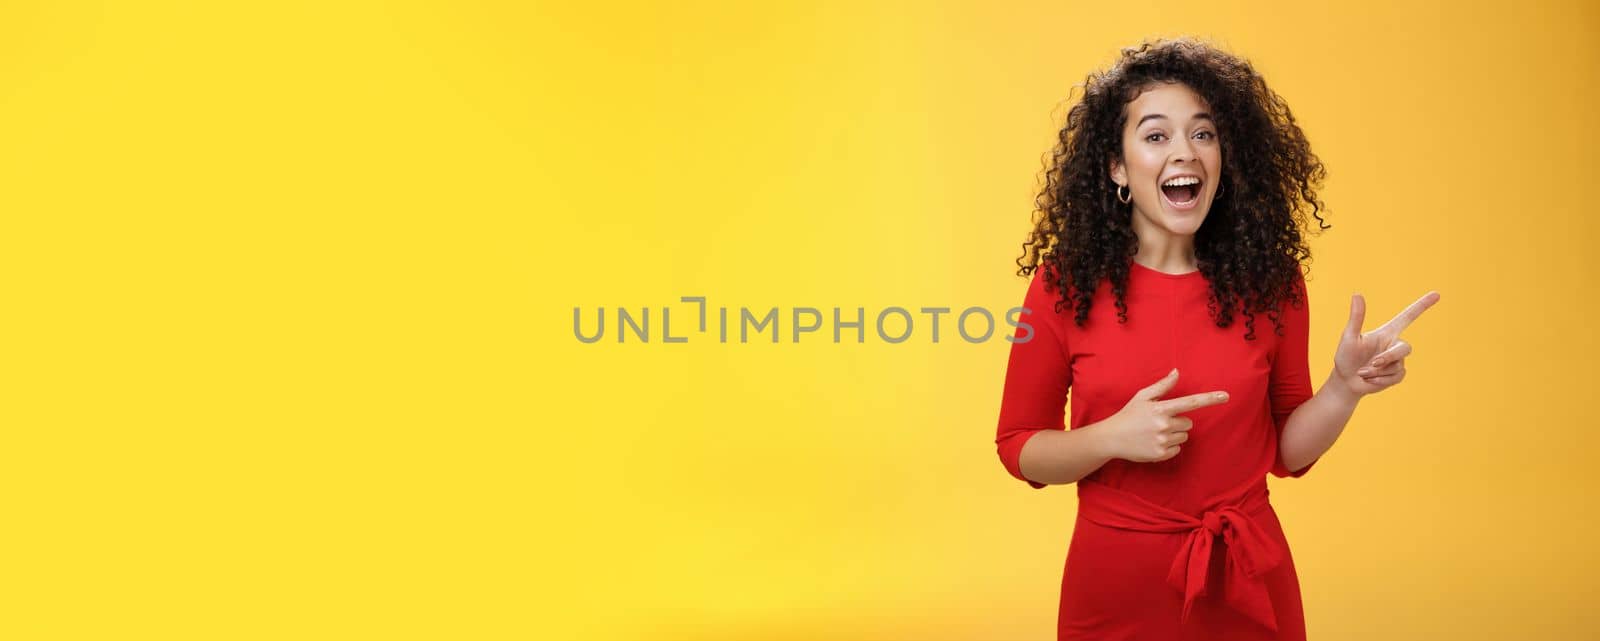 Thrilled and happy joyful young charismatic woman with curly hair in red dress laughing out loud and smiling amazed, delighted pointing at upper right corner impressed over yellow background.